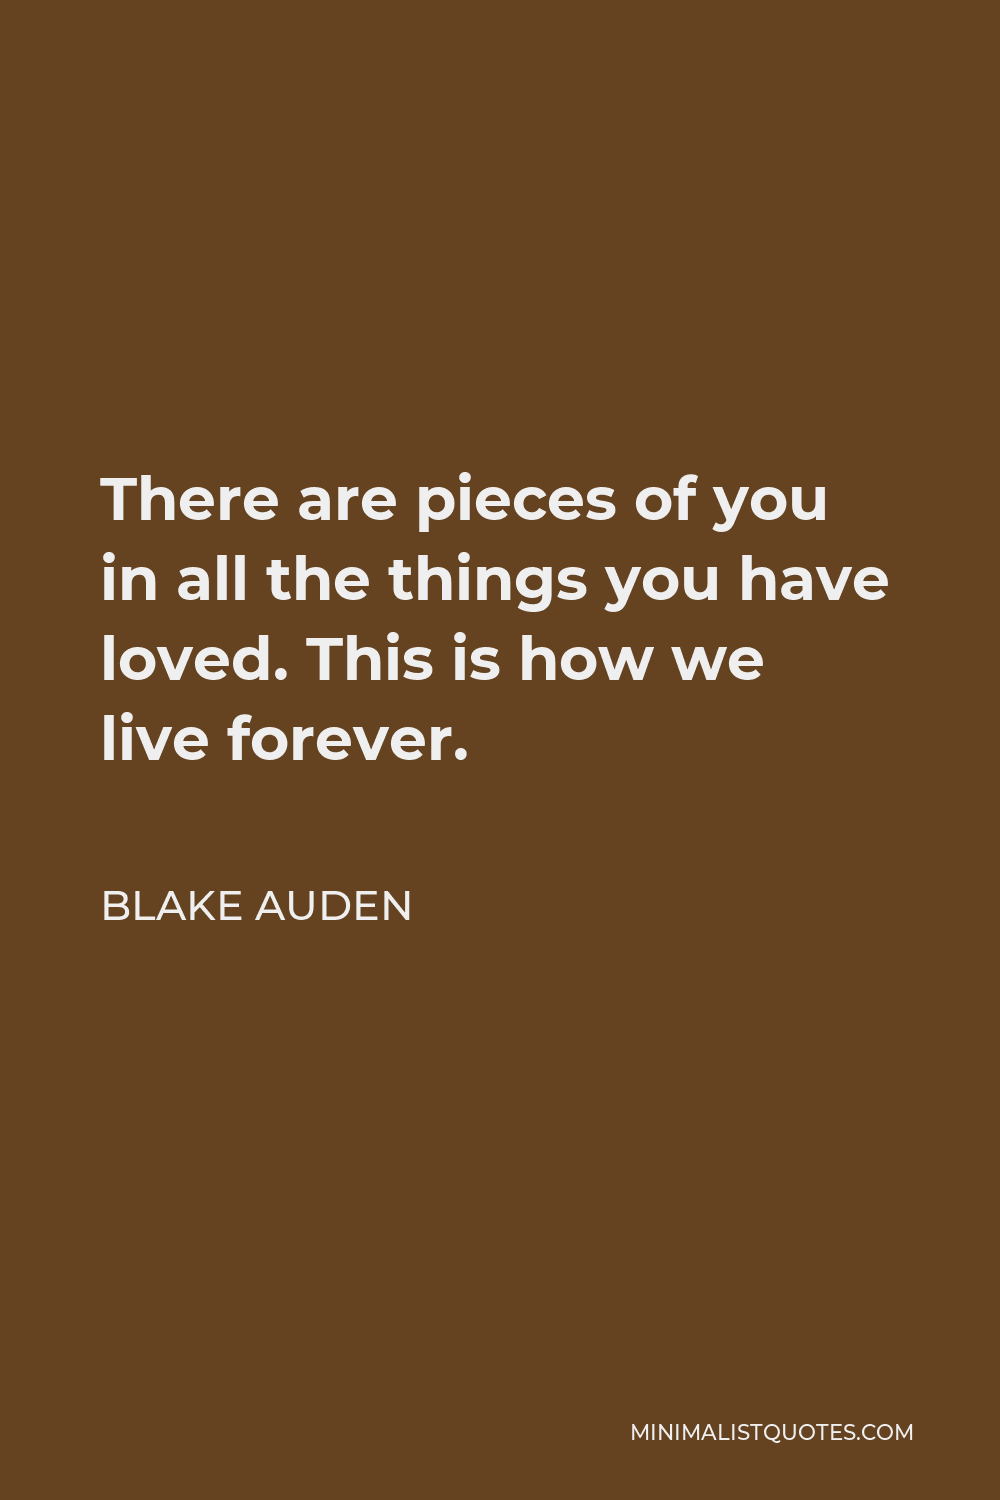 Blake Auden Quote - There are pieces of you in all the things you have loved. This is how we live forever.